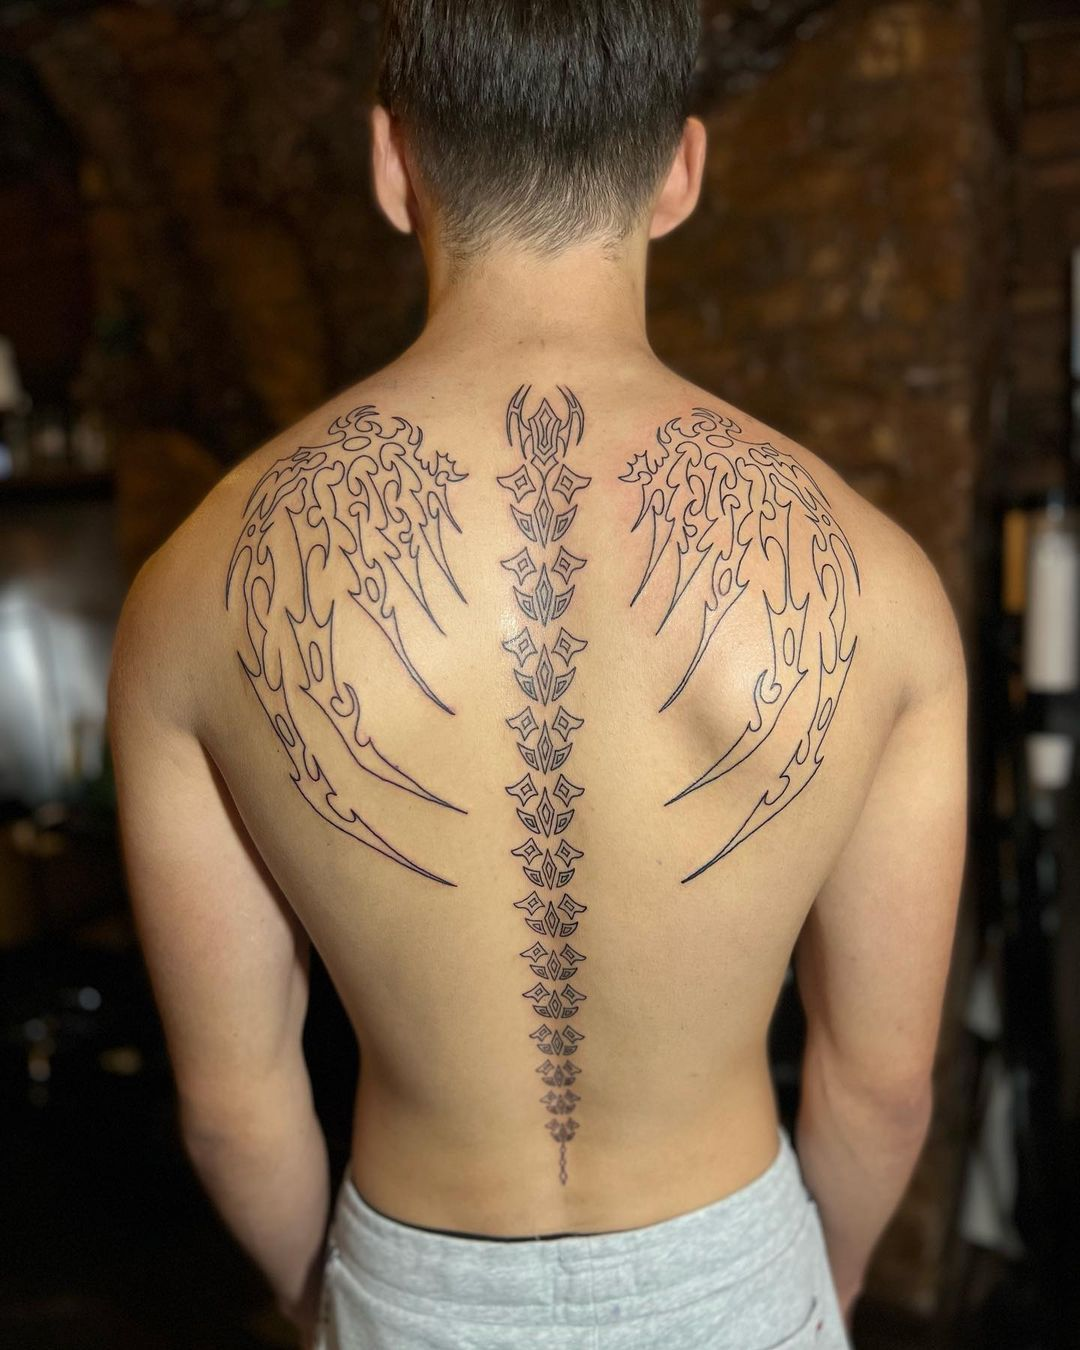 Top 10 Spine Tattoos The Best Ideas For Spine Tattoos  MrInkwells